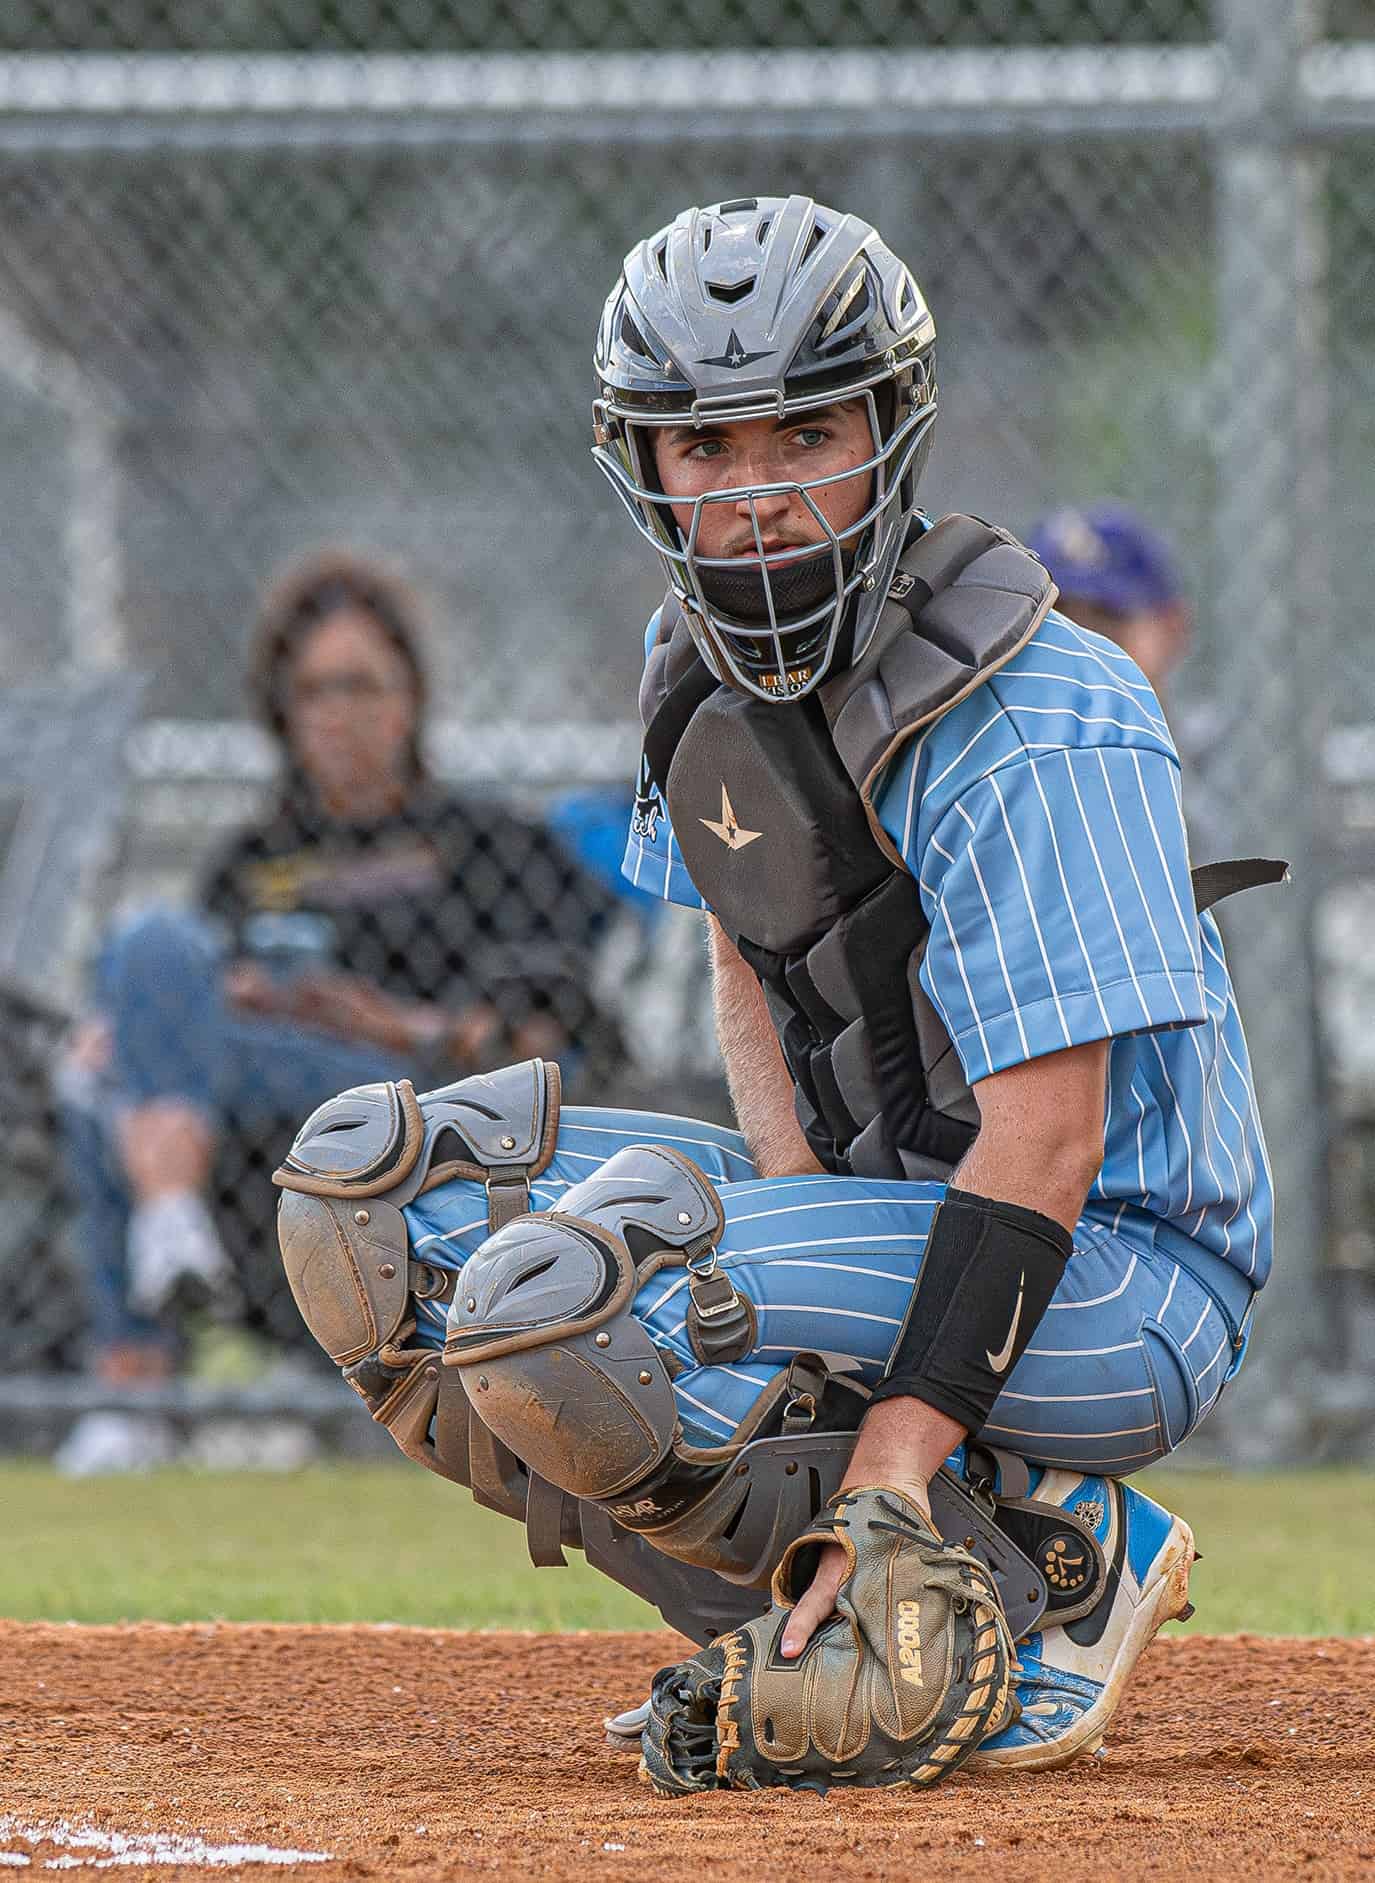 Nature Coast Tech catcher, Brady McMurdo looks to the dugout to get the pitch choice during the game versus Hernando High in the 4A District 6 title game. Photo by [Joseph Dicristofalo]